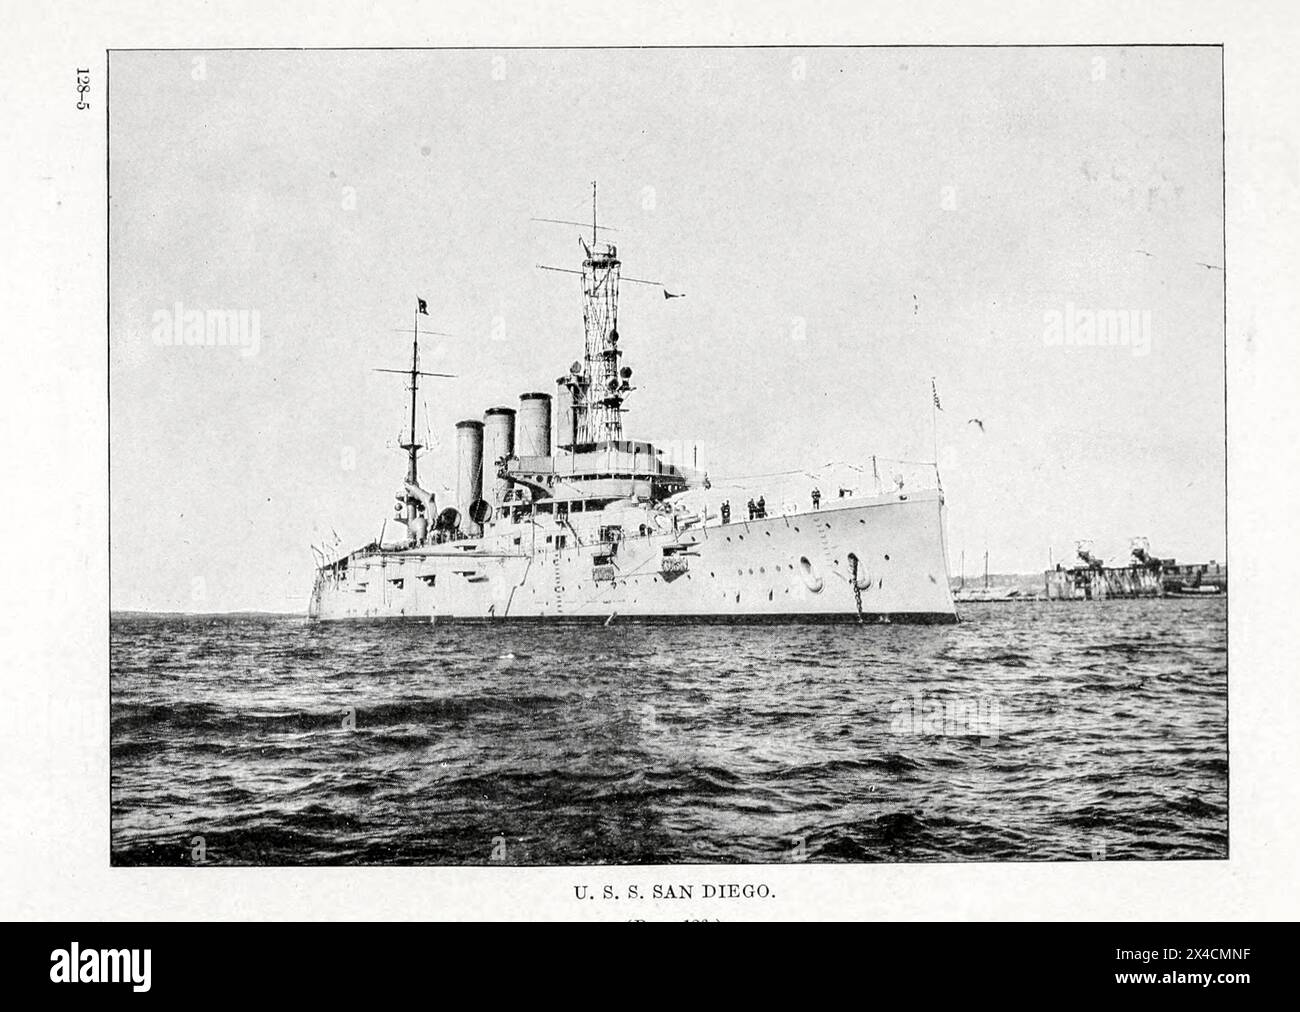 U. S. S. San Diego from ' German submarine activities on the Atlantic coast of the United States and Canada ' by United States. Office of Naval Records and Library Publication date 1920  The second USS California (ACR-6), also referred to as 'Armored Cruiser No. 6', and later renamed San Diego, was a United States Navy Pennsylvania-class armored cruiser. California was launched on 28 April 1904 by Union Iron Works at San Francisco, California, sponsored by Miss Florence Pardee, daughter of California Governor George C. Pardee, and commissioned on 1 August 1907 Stock Photo